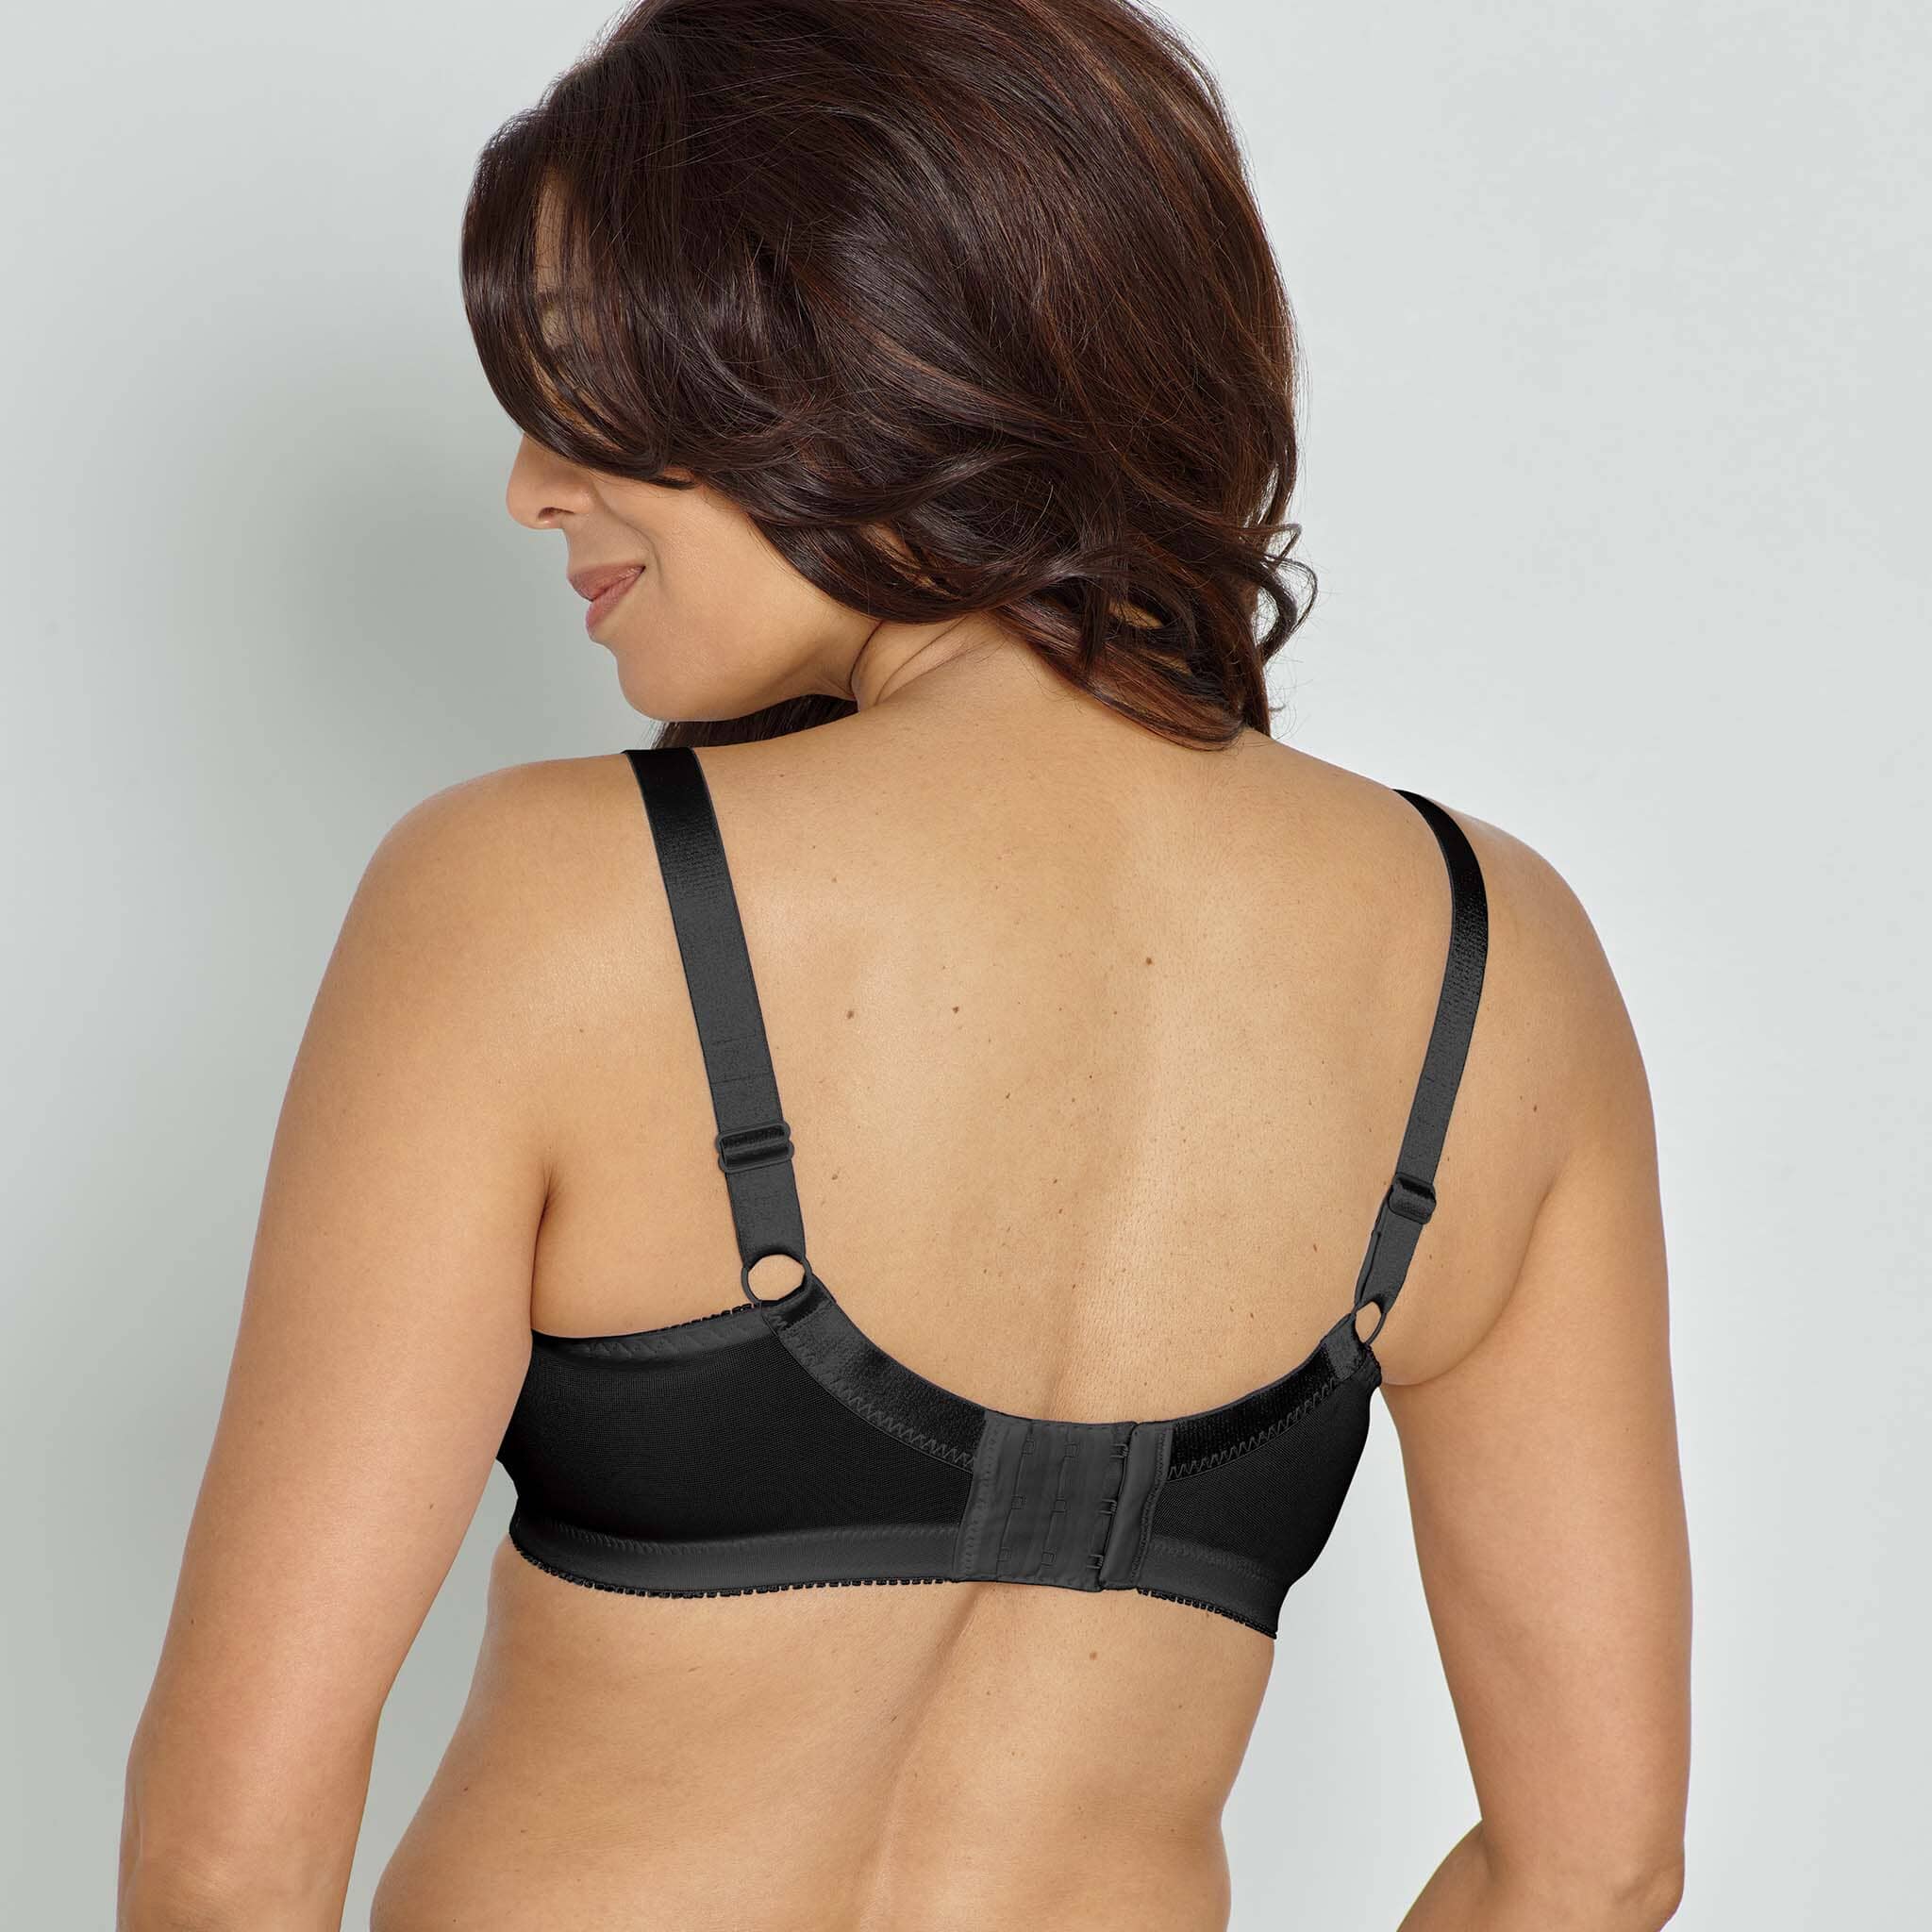 Wide Strap Leisure Black Color Bras with Silicone Breast Forms